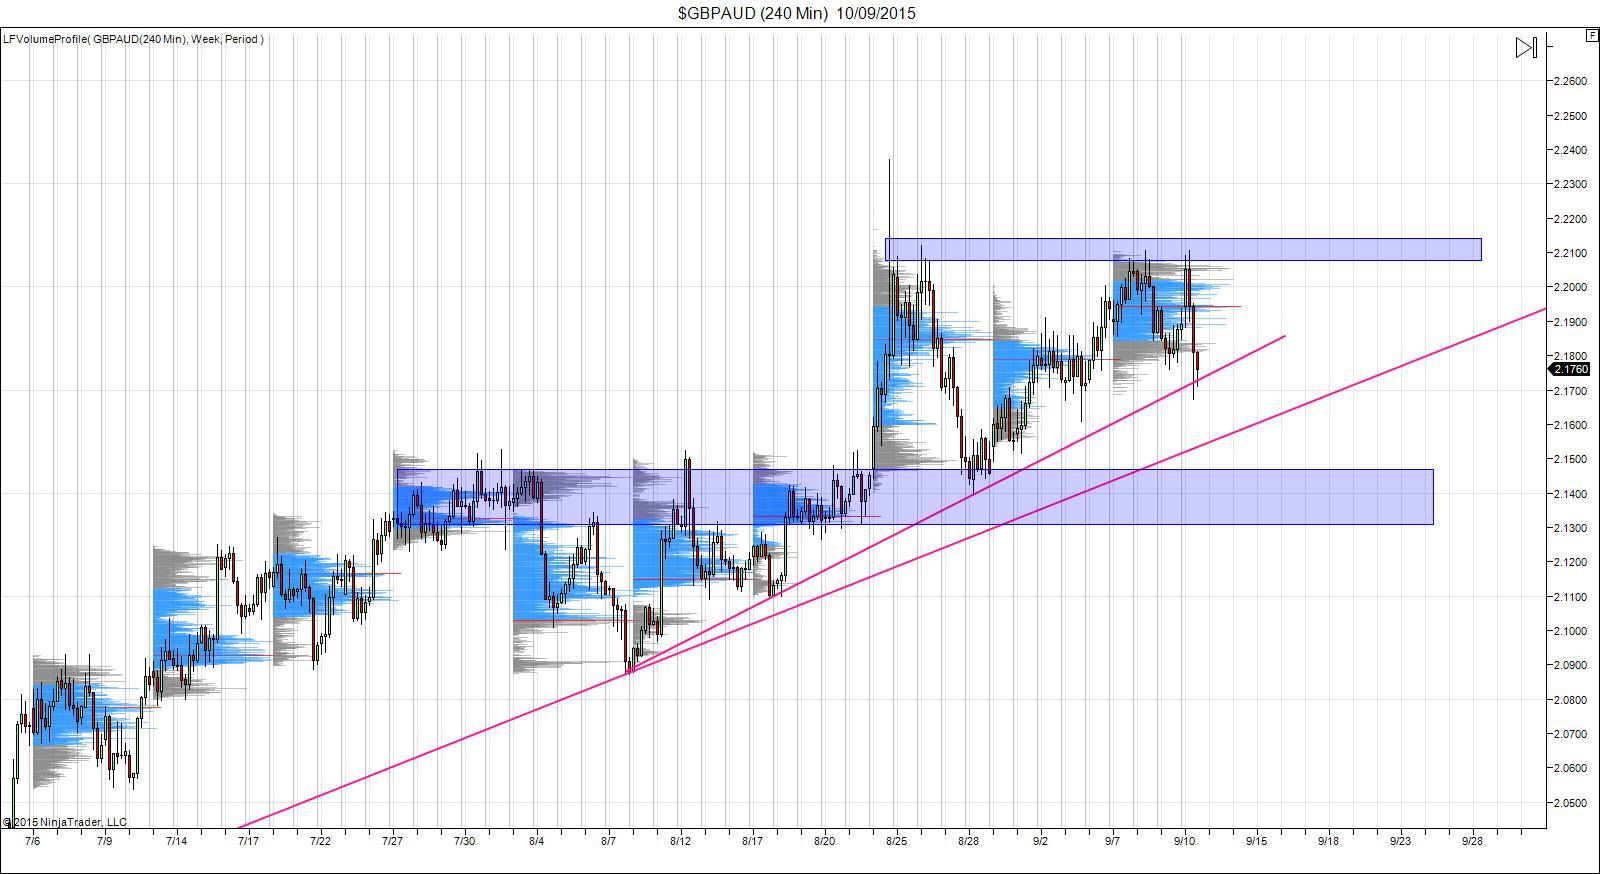 GBP/AUD 240-Minute Chart